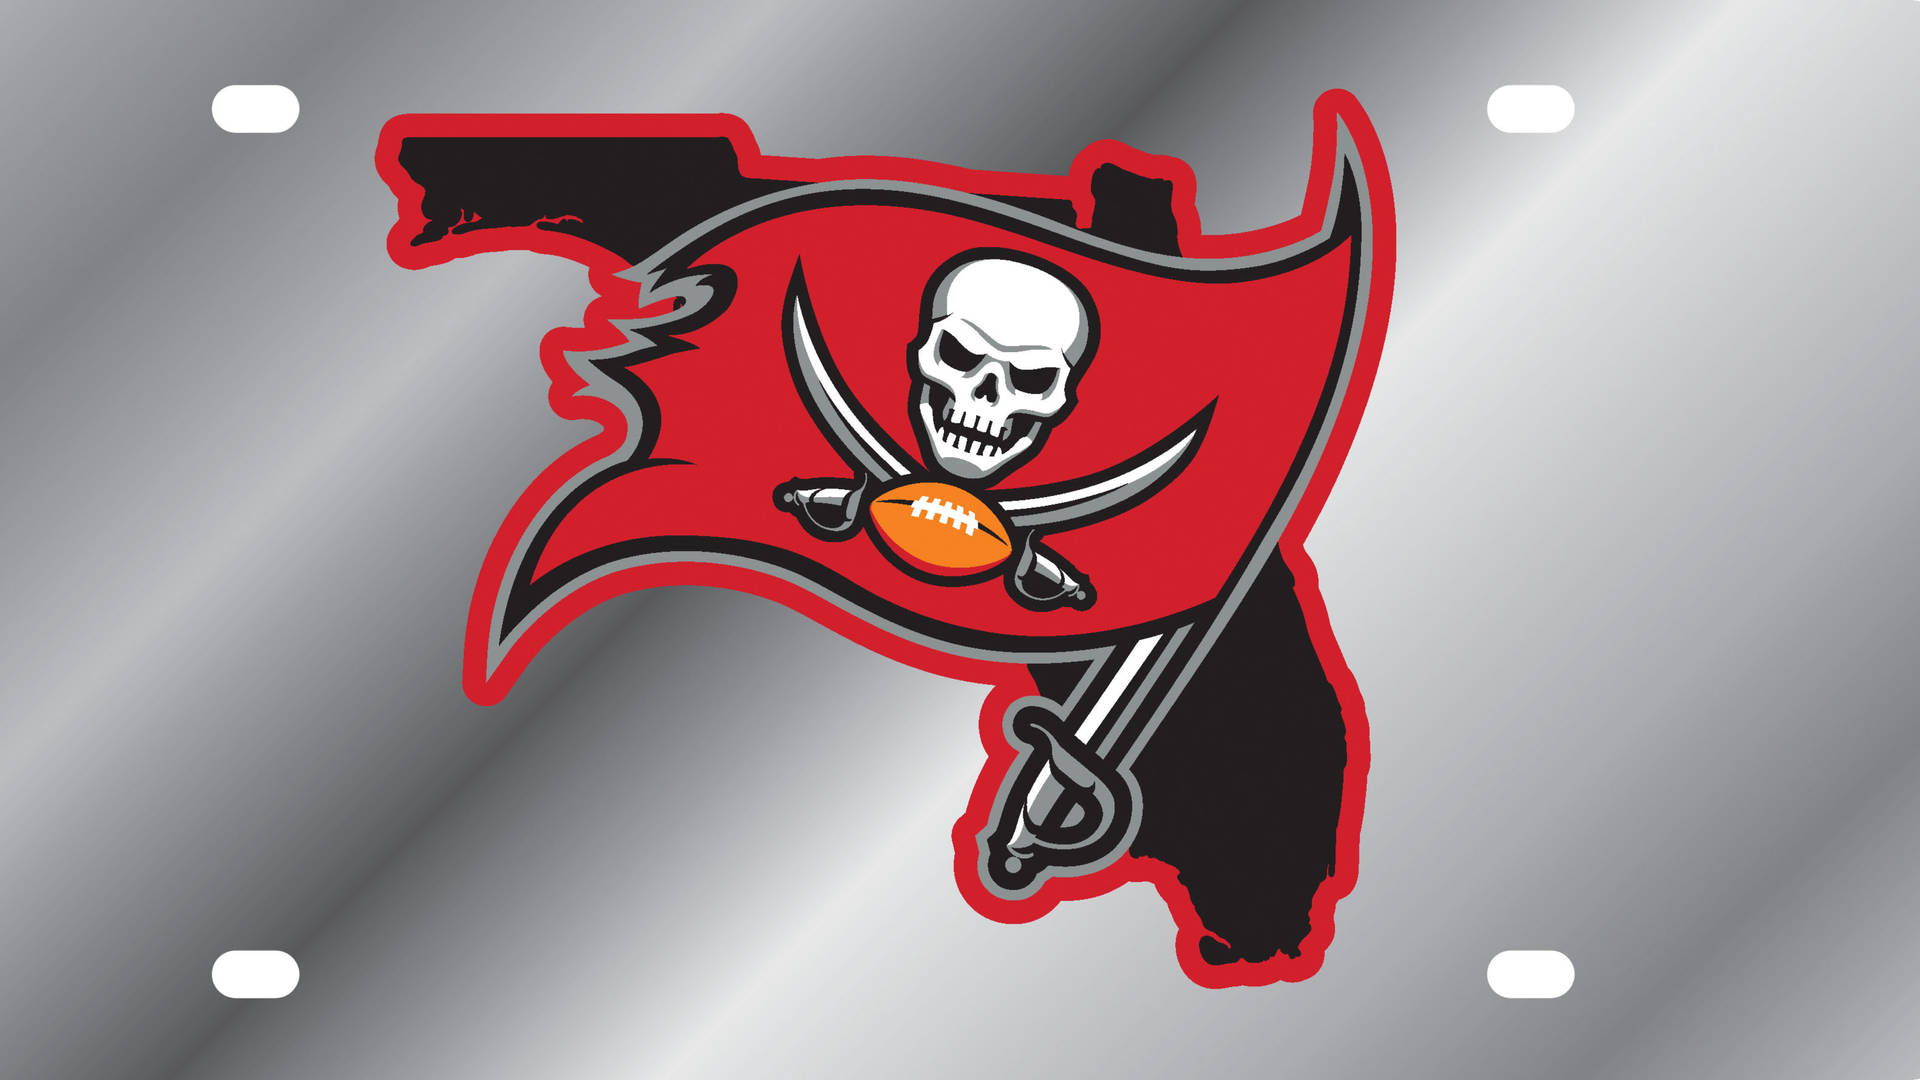 Tampa Bay Buccaneers Plate Design Background